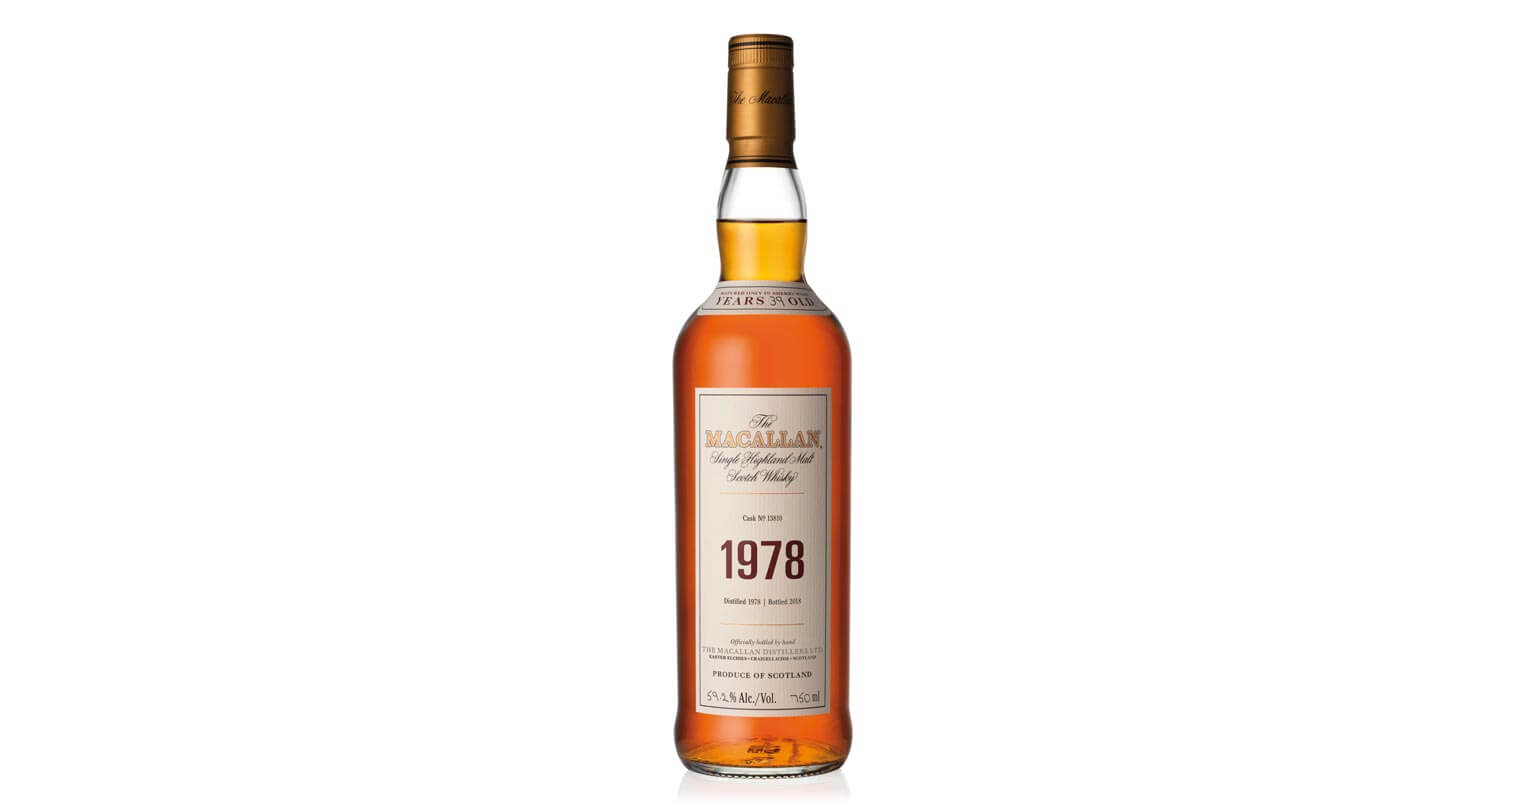 The Macallan 1978 Fine & Rare Whisky, bottle on white, featured image